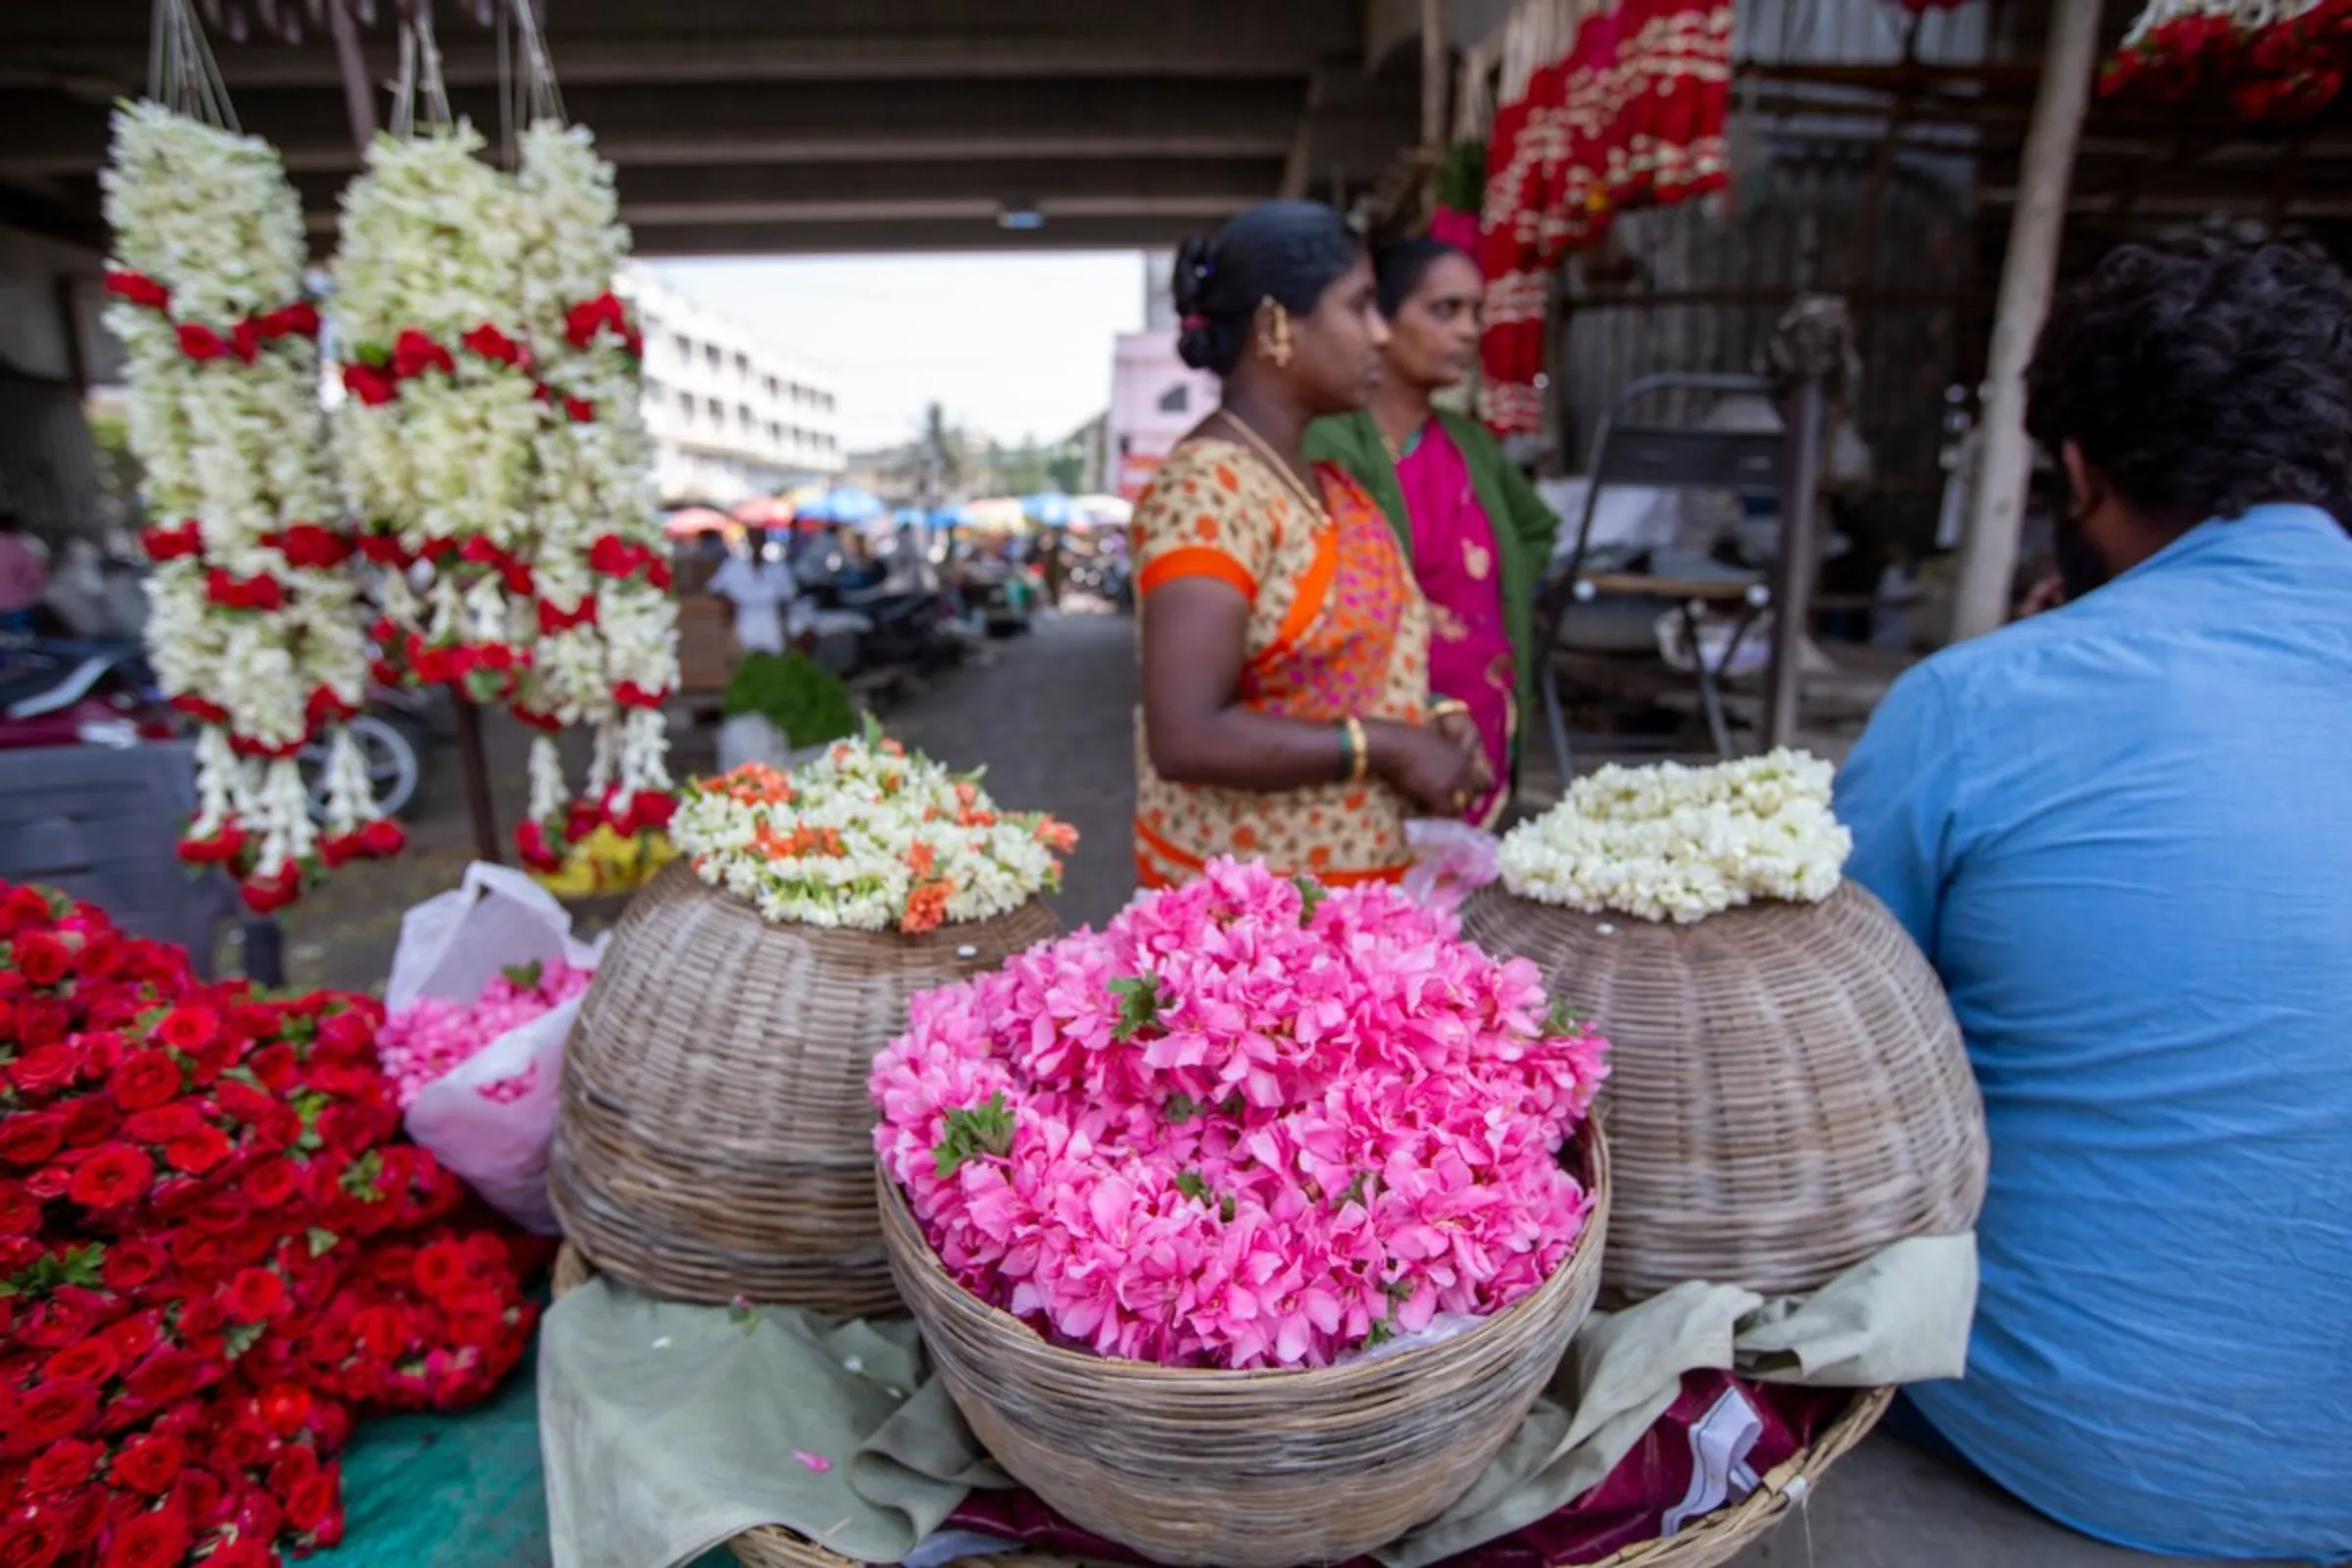 Flowers for sale at a market in Hosur, an auto manufacturing hub in India, April 20, 2022